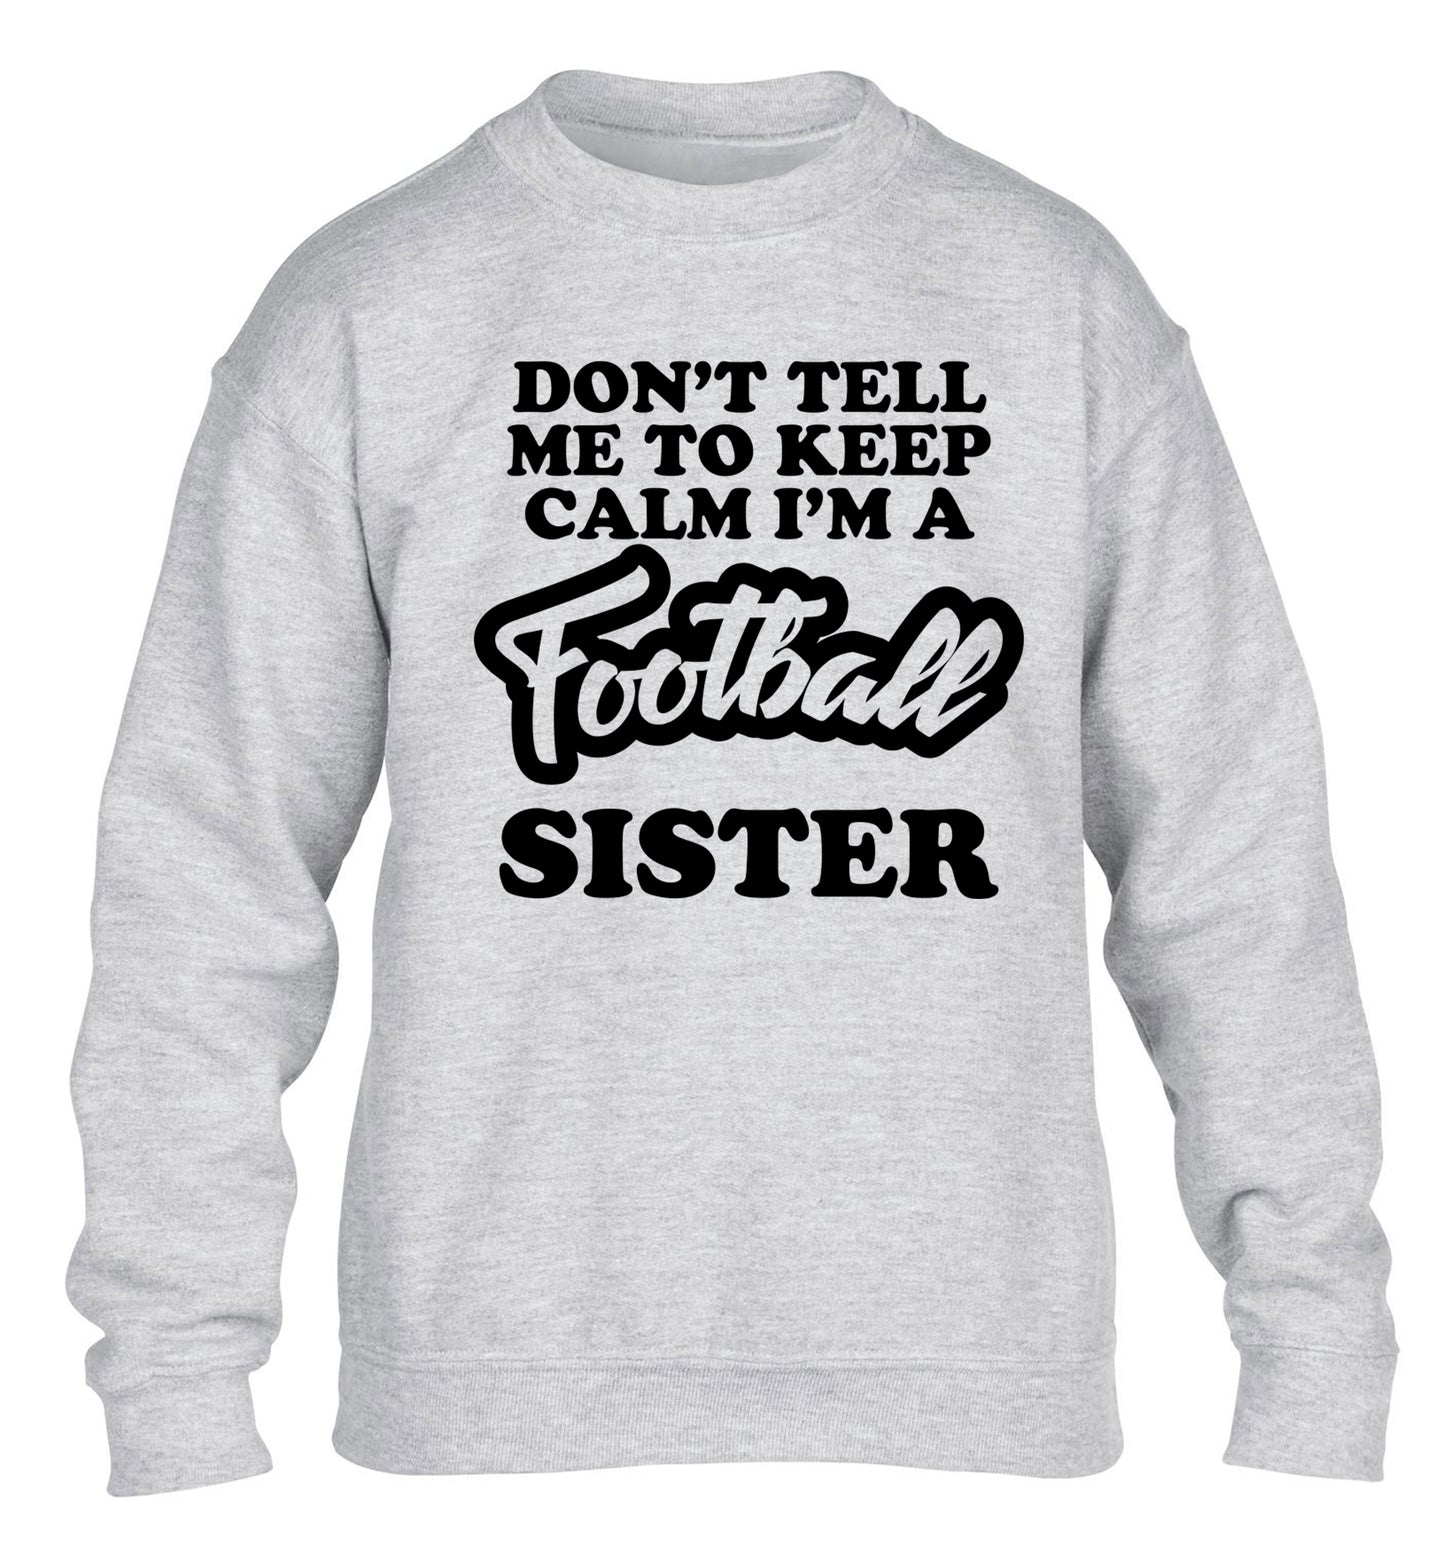 Don't tell me to keep calm I'm a football sister children's grey sweater 12-14 Years